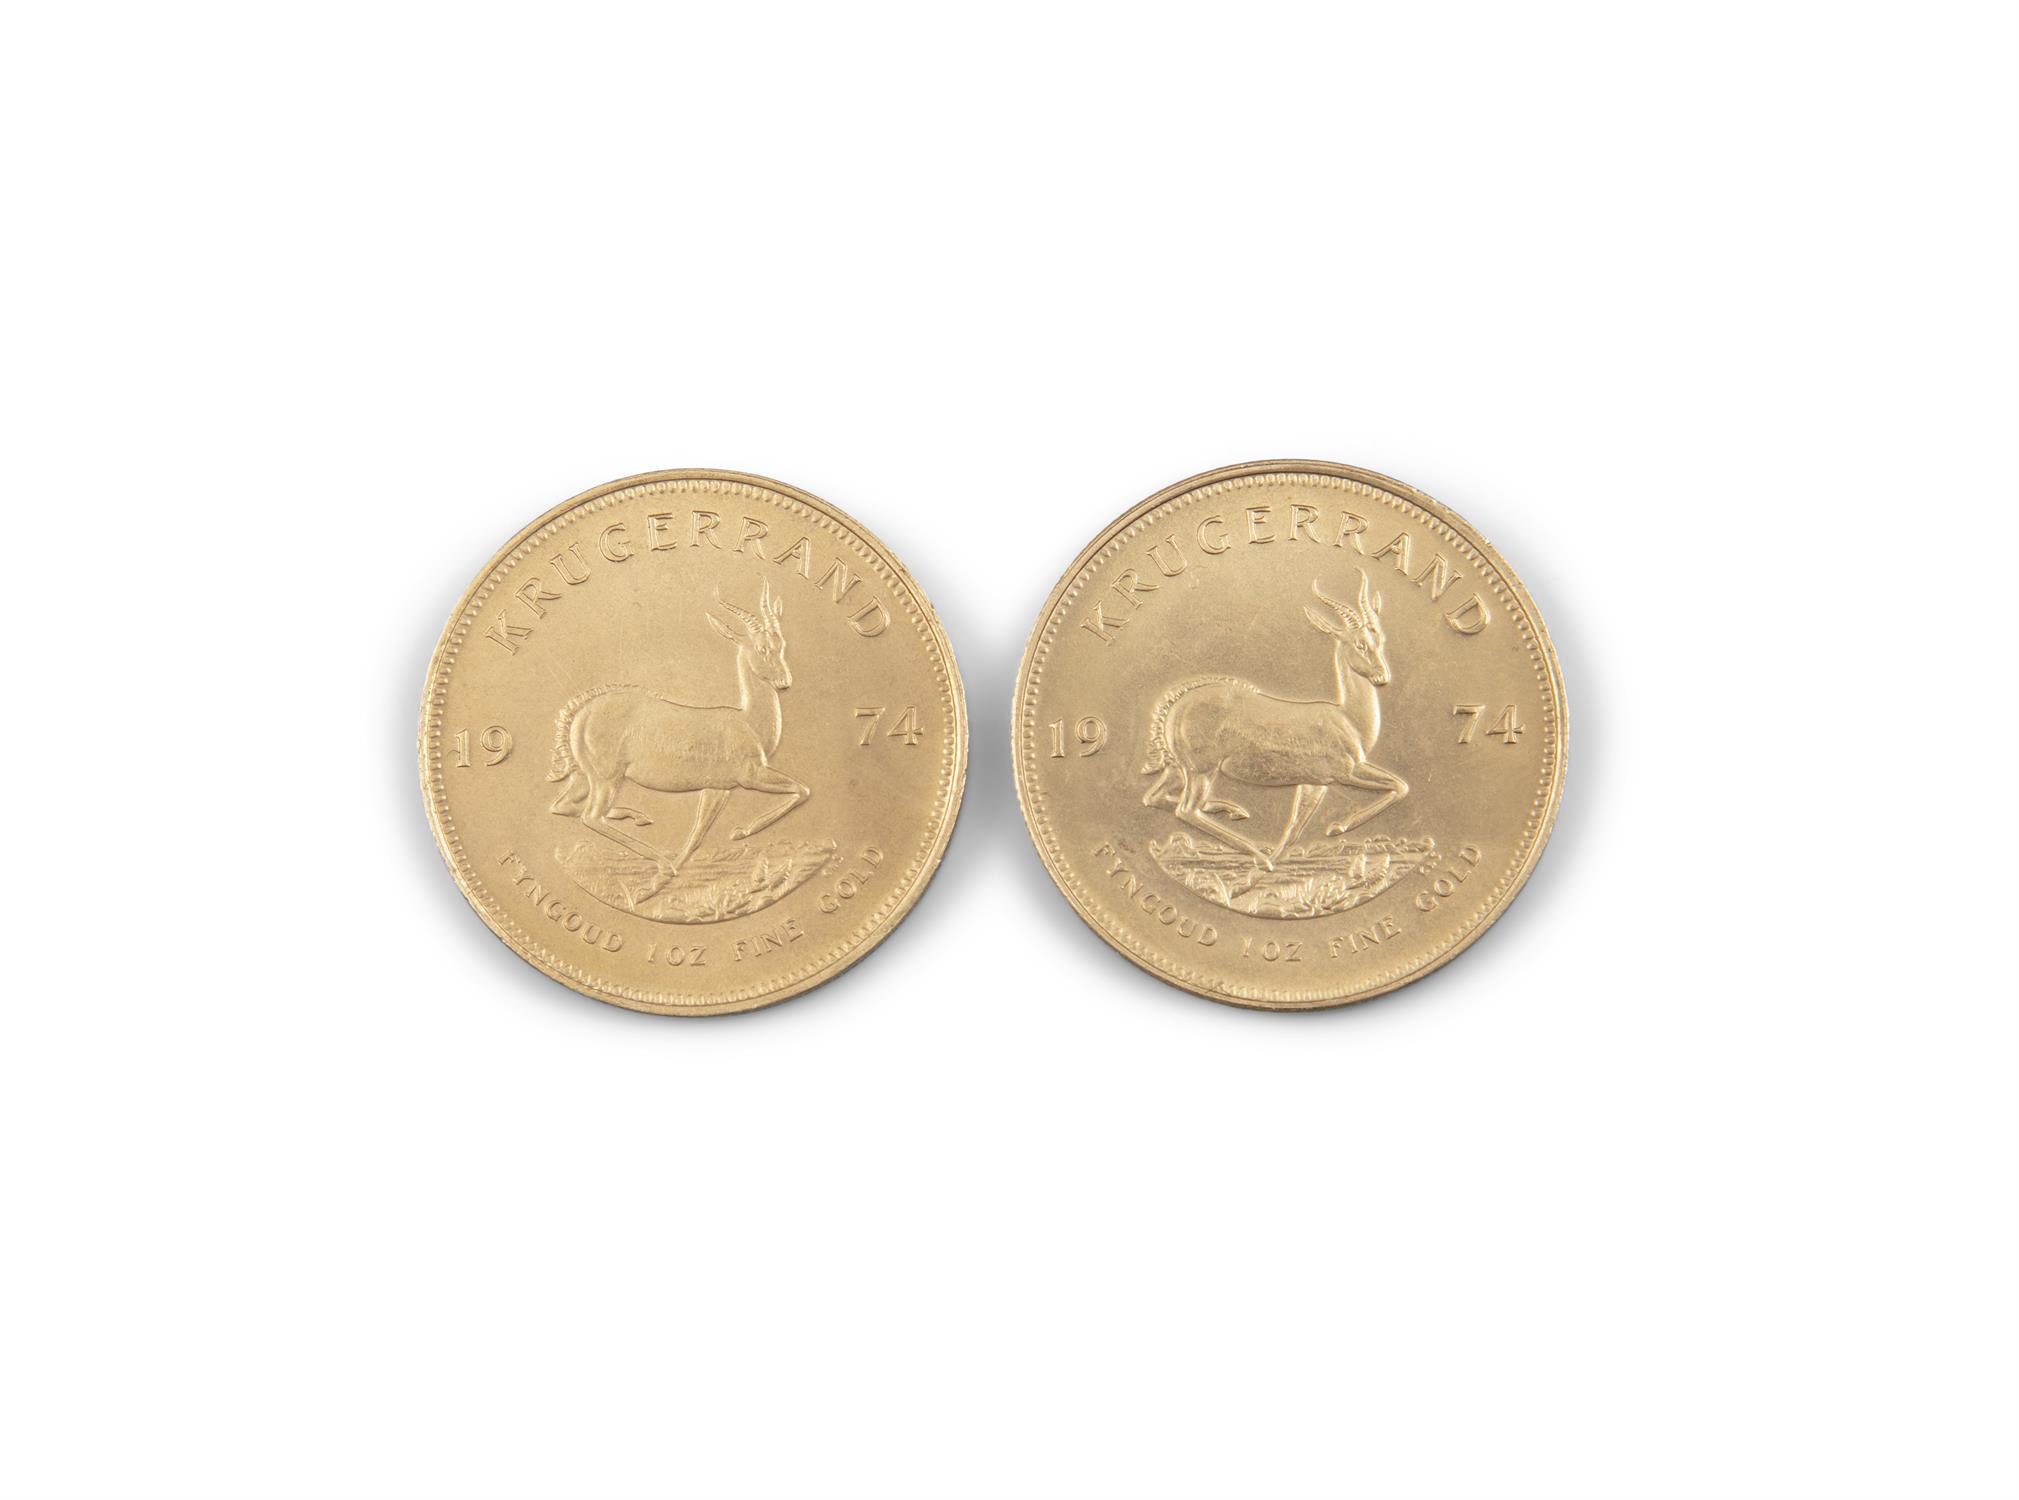 TWO SOUTH AFRICAN GOLD KRUGERRAND COINS, 1974, (68 grams)